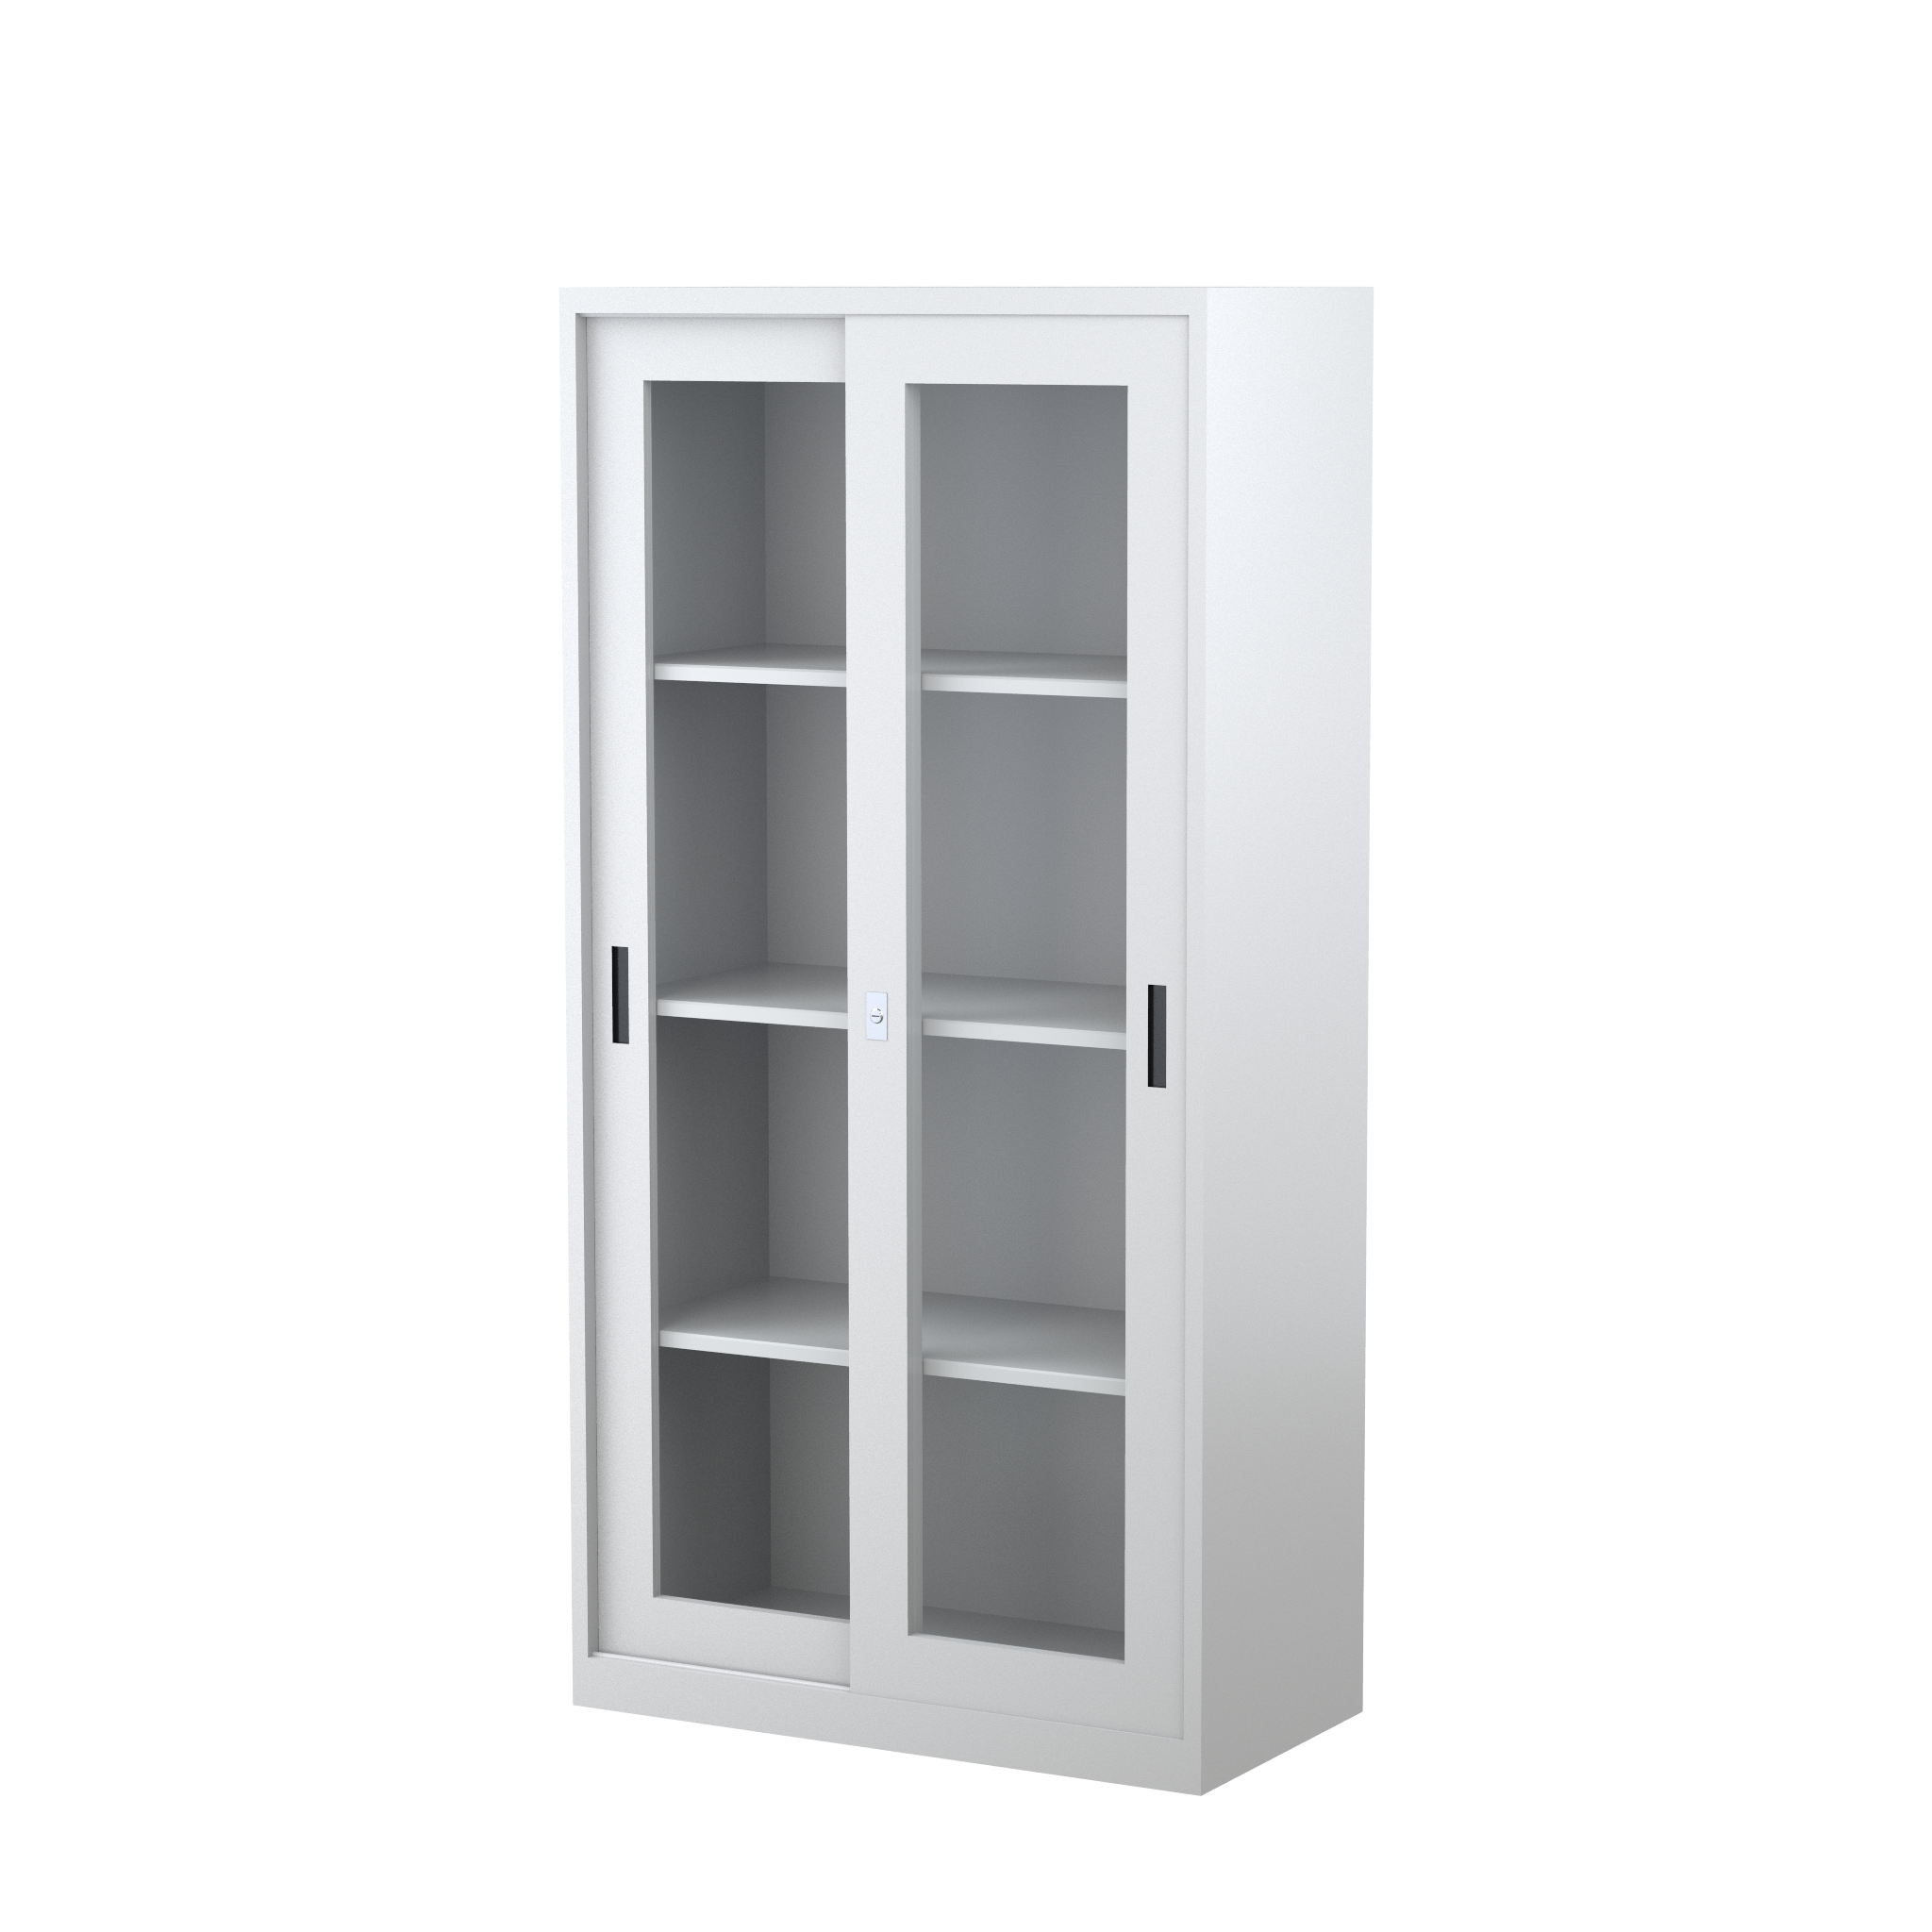 GD1830_914 - STEELCO SG Cabinet 1830H x 914W x  465D - 3 Shelves-WS.png